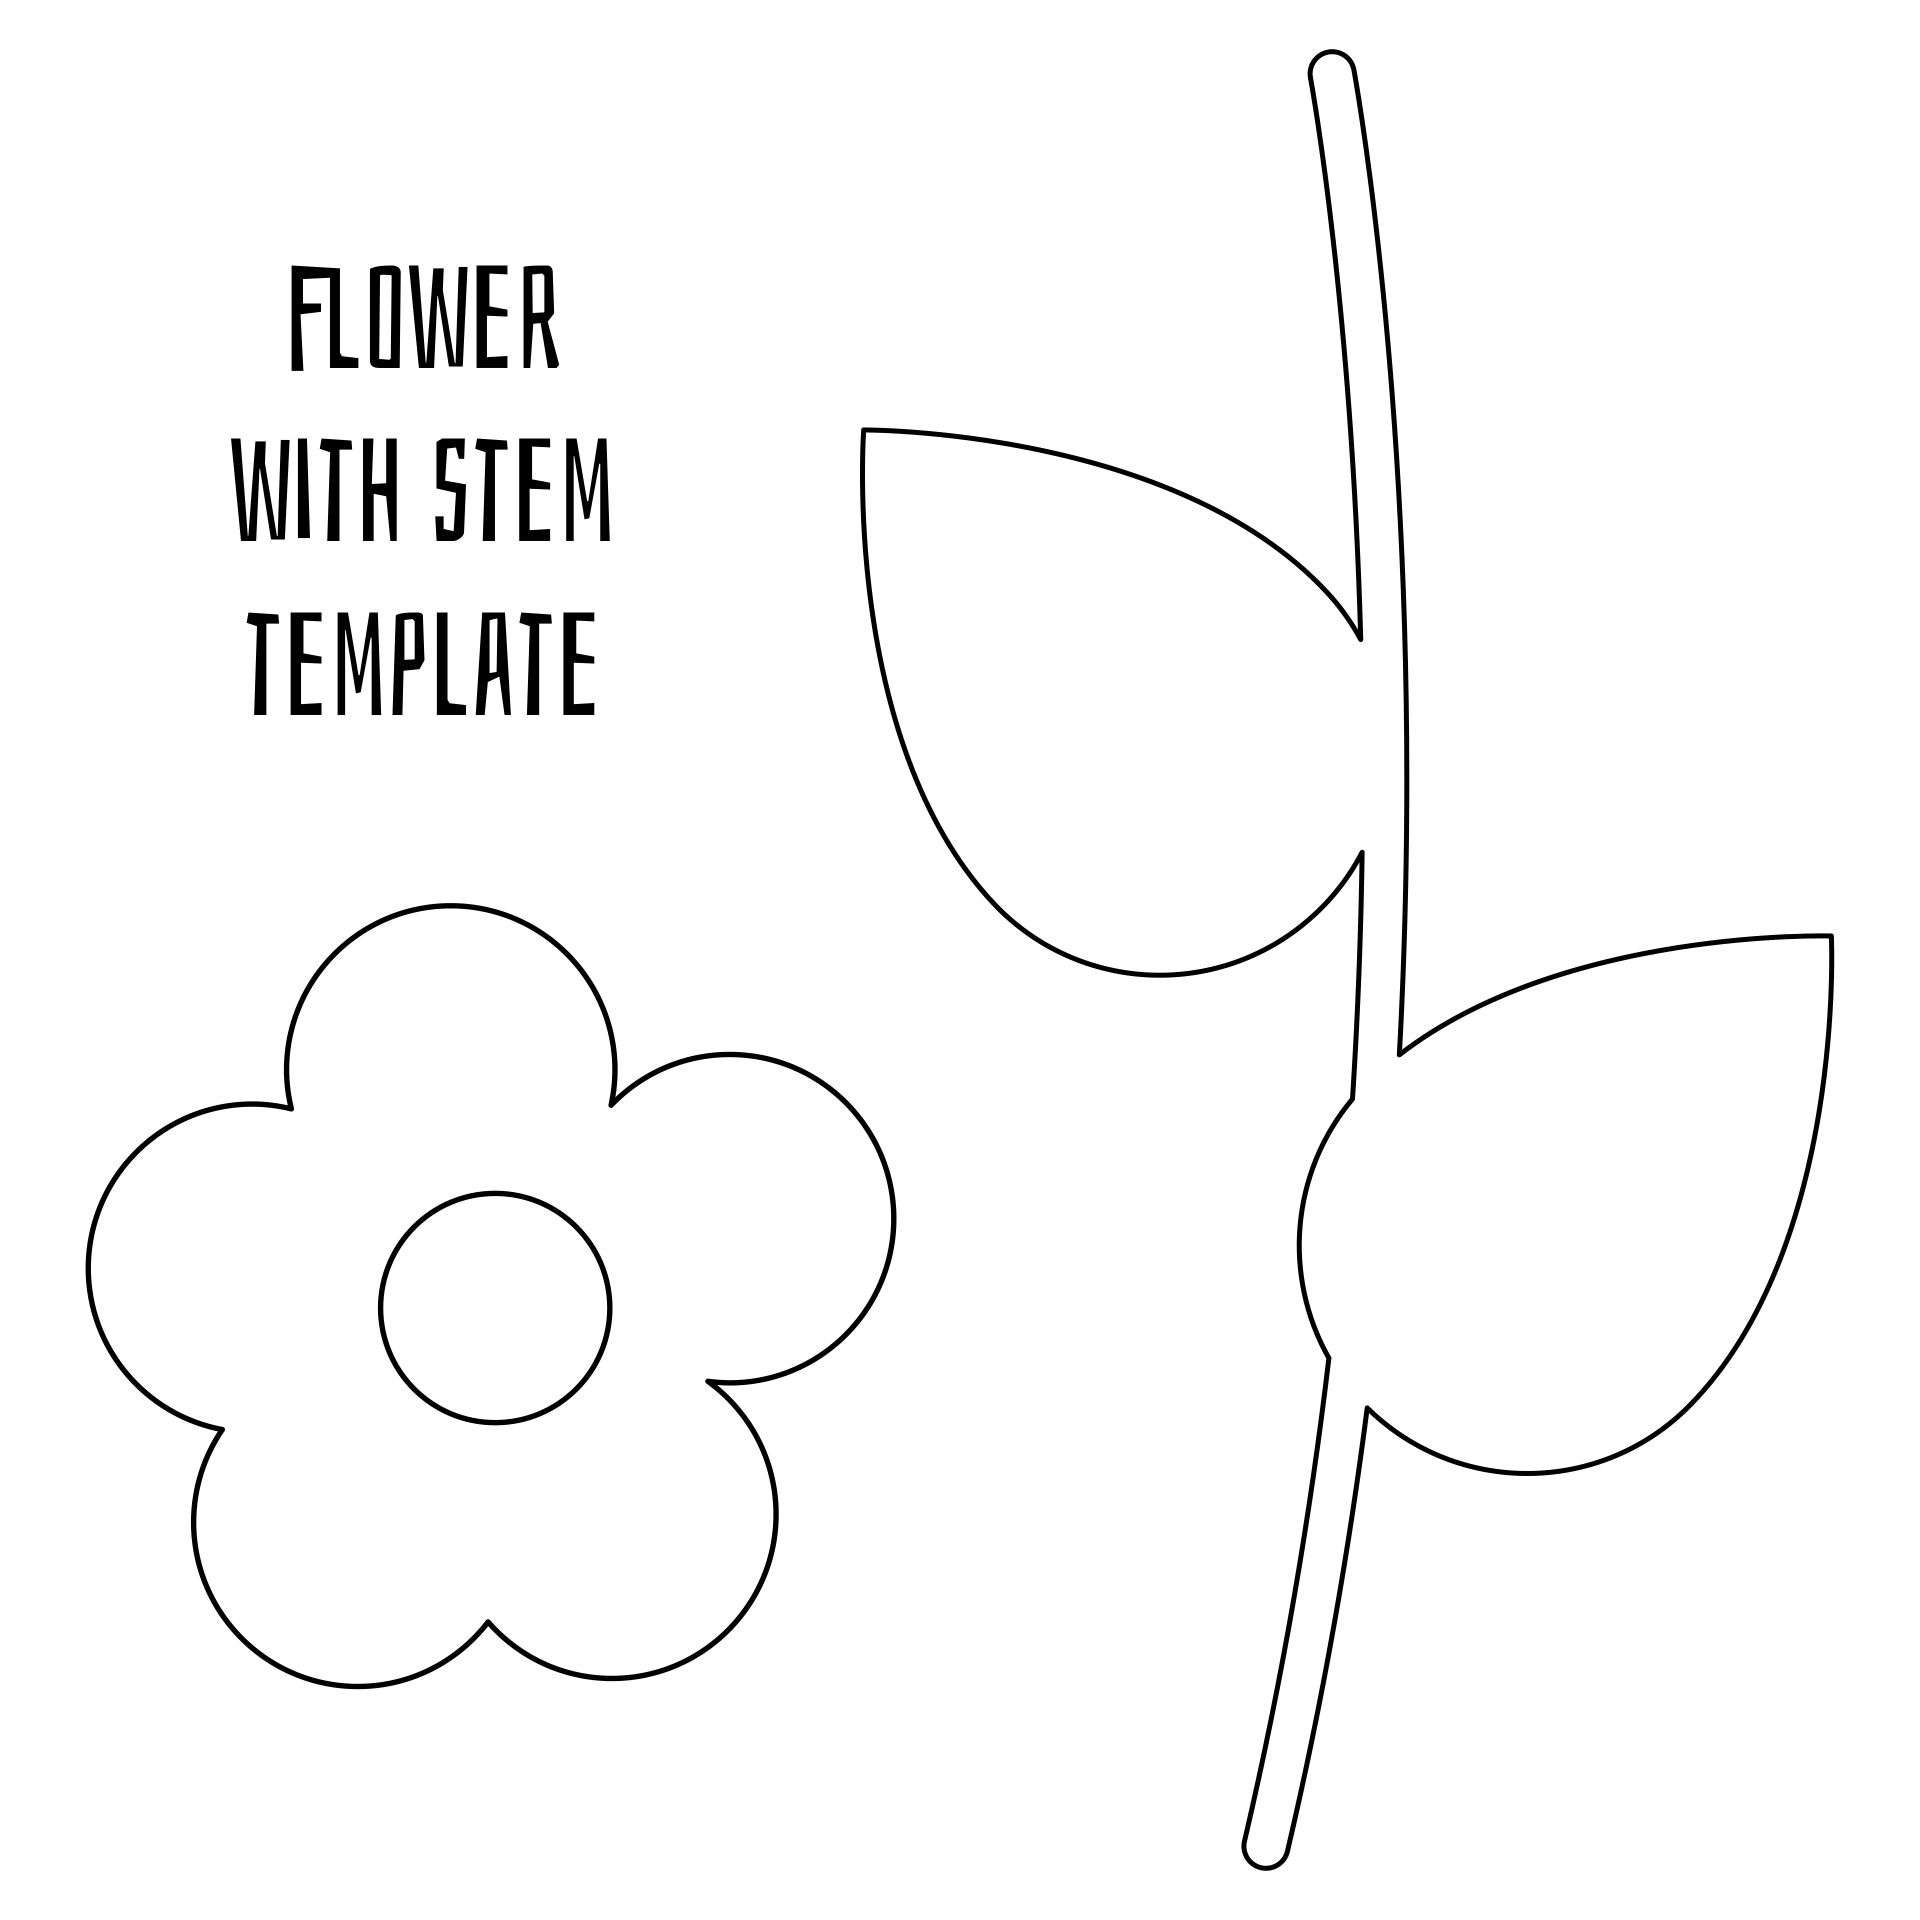 Flower with Stem Template Printable